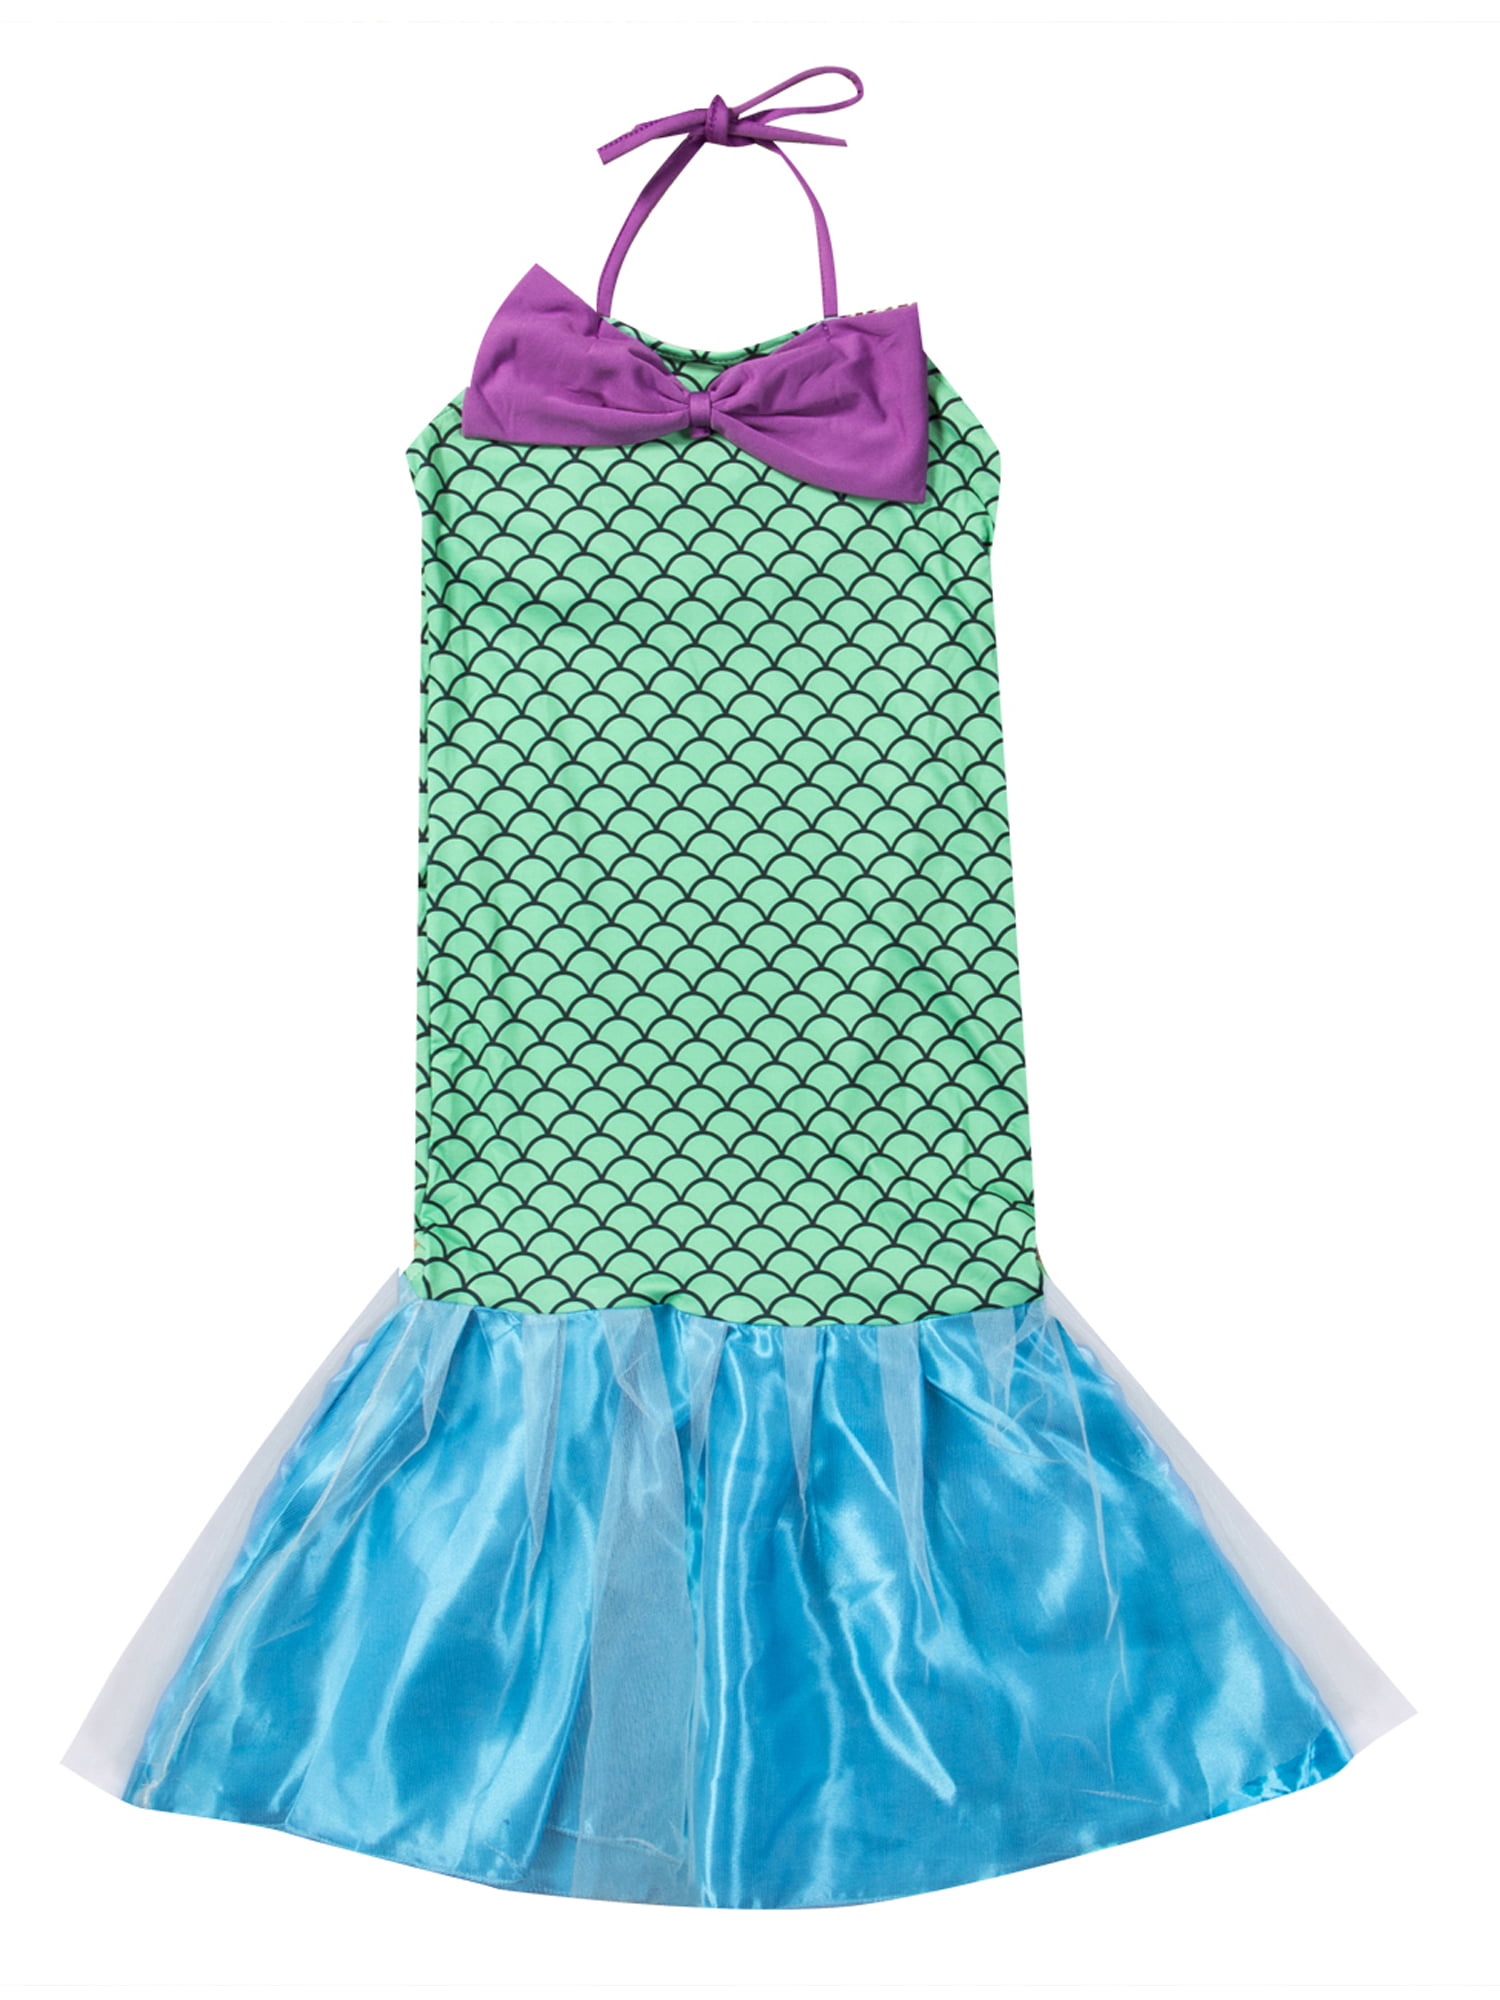 Princess Kids Baby Girls Mermaid Tail Dress Tops+Skirts Outfits Sequins Costume